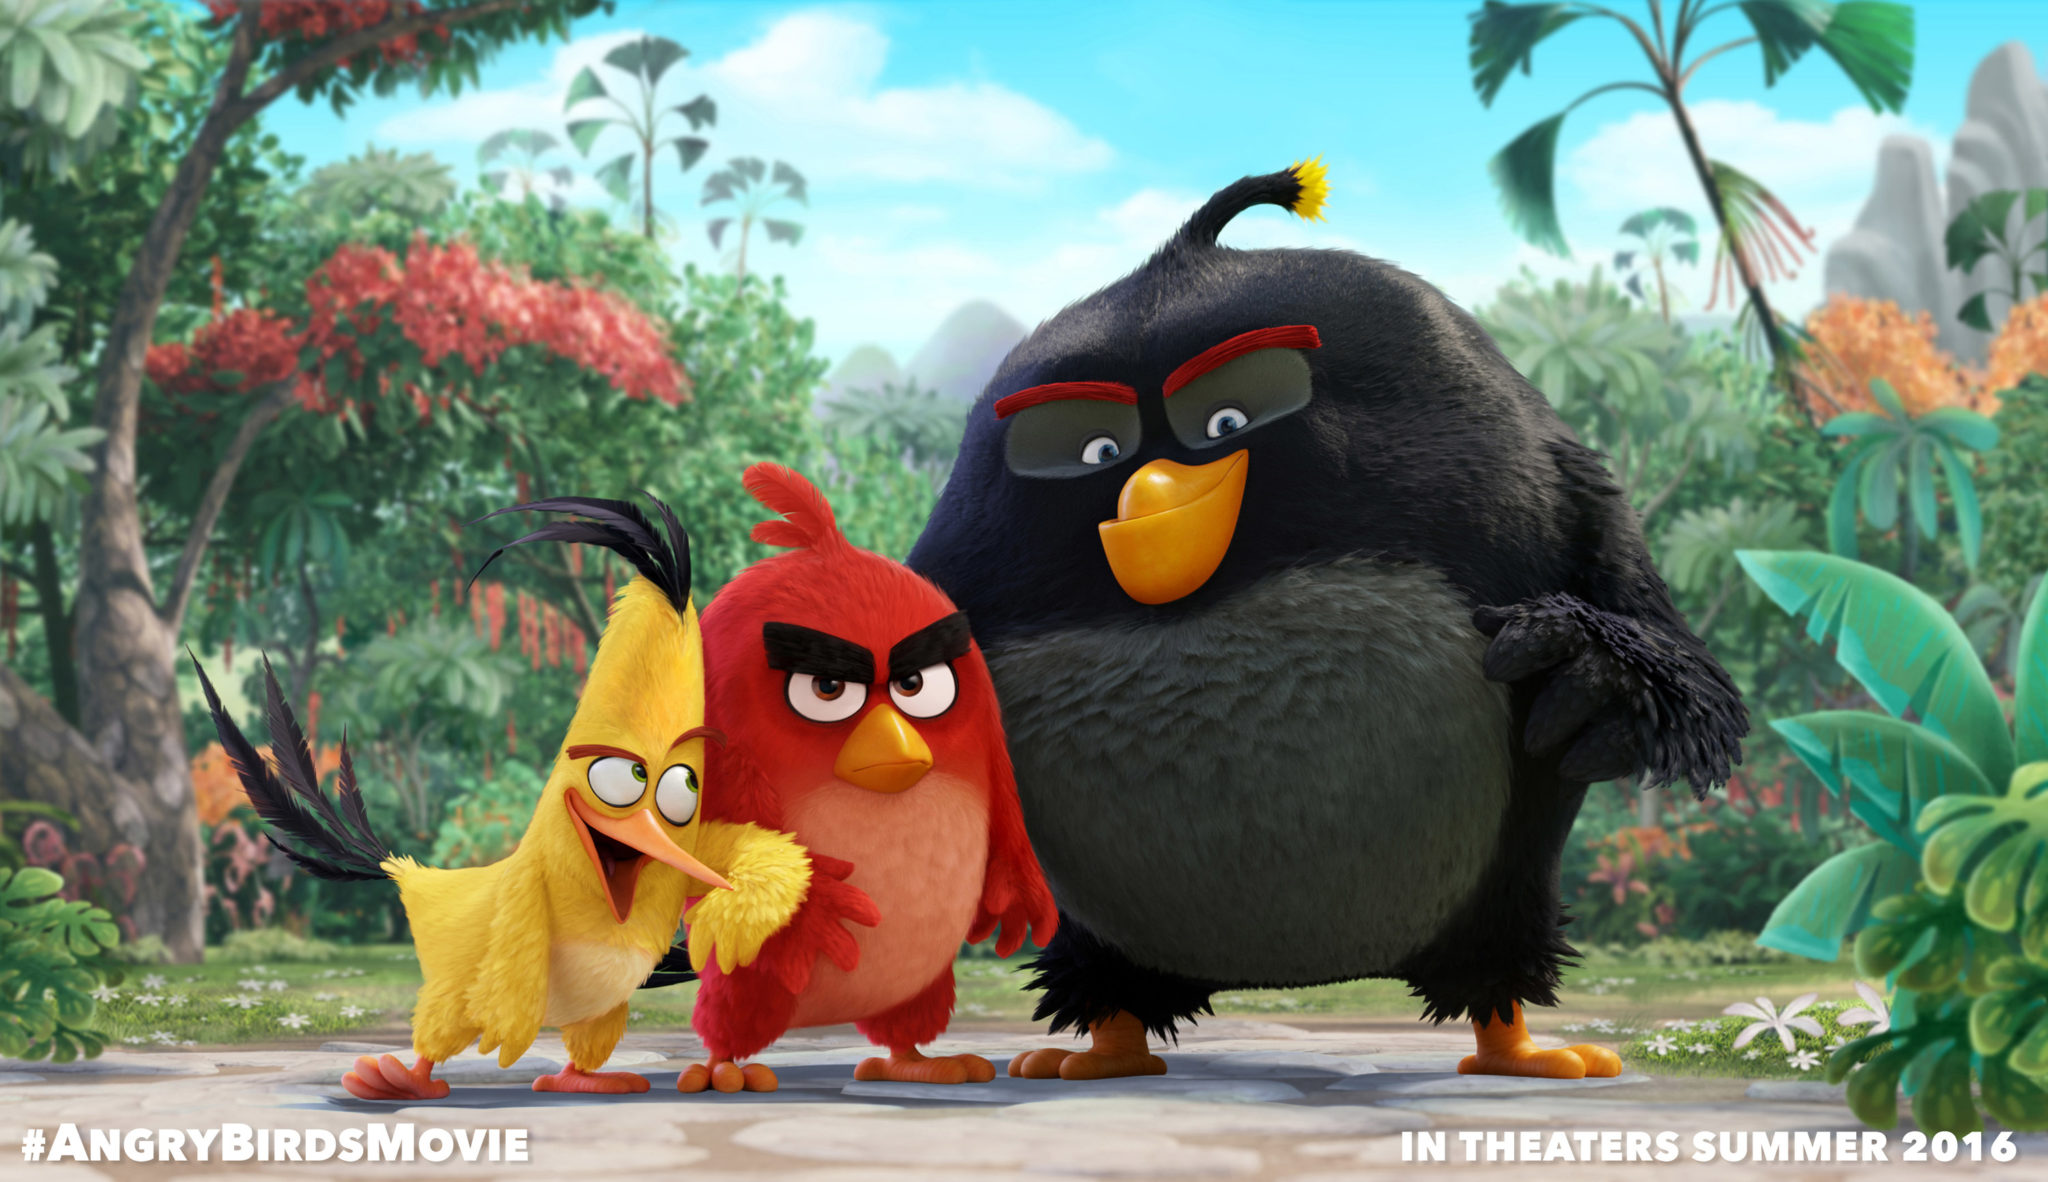 What You Should Know Before Seeing: 'The Angry Birds Movie' - Rotoscopers